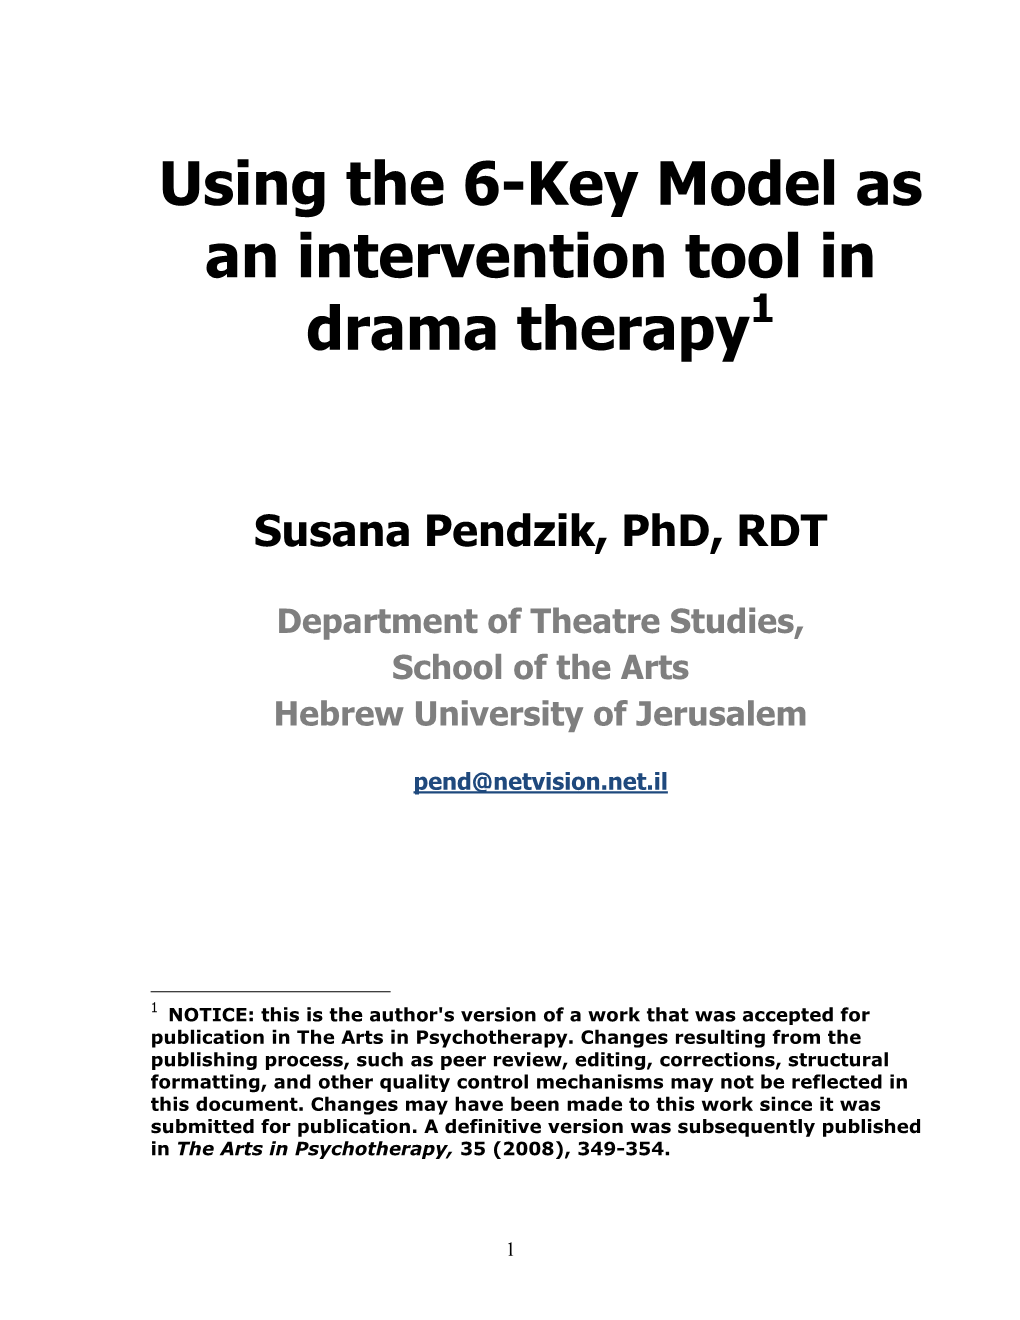 Using the 6-Key Model As an Intervention Tool in Drama Therapy